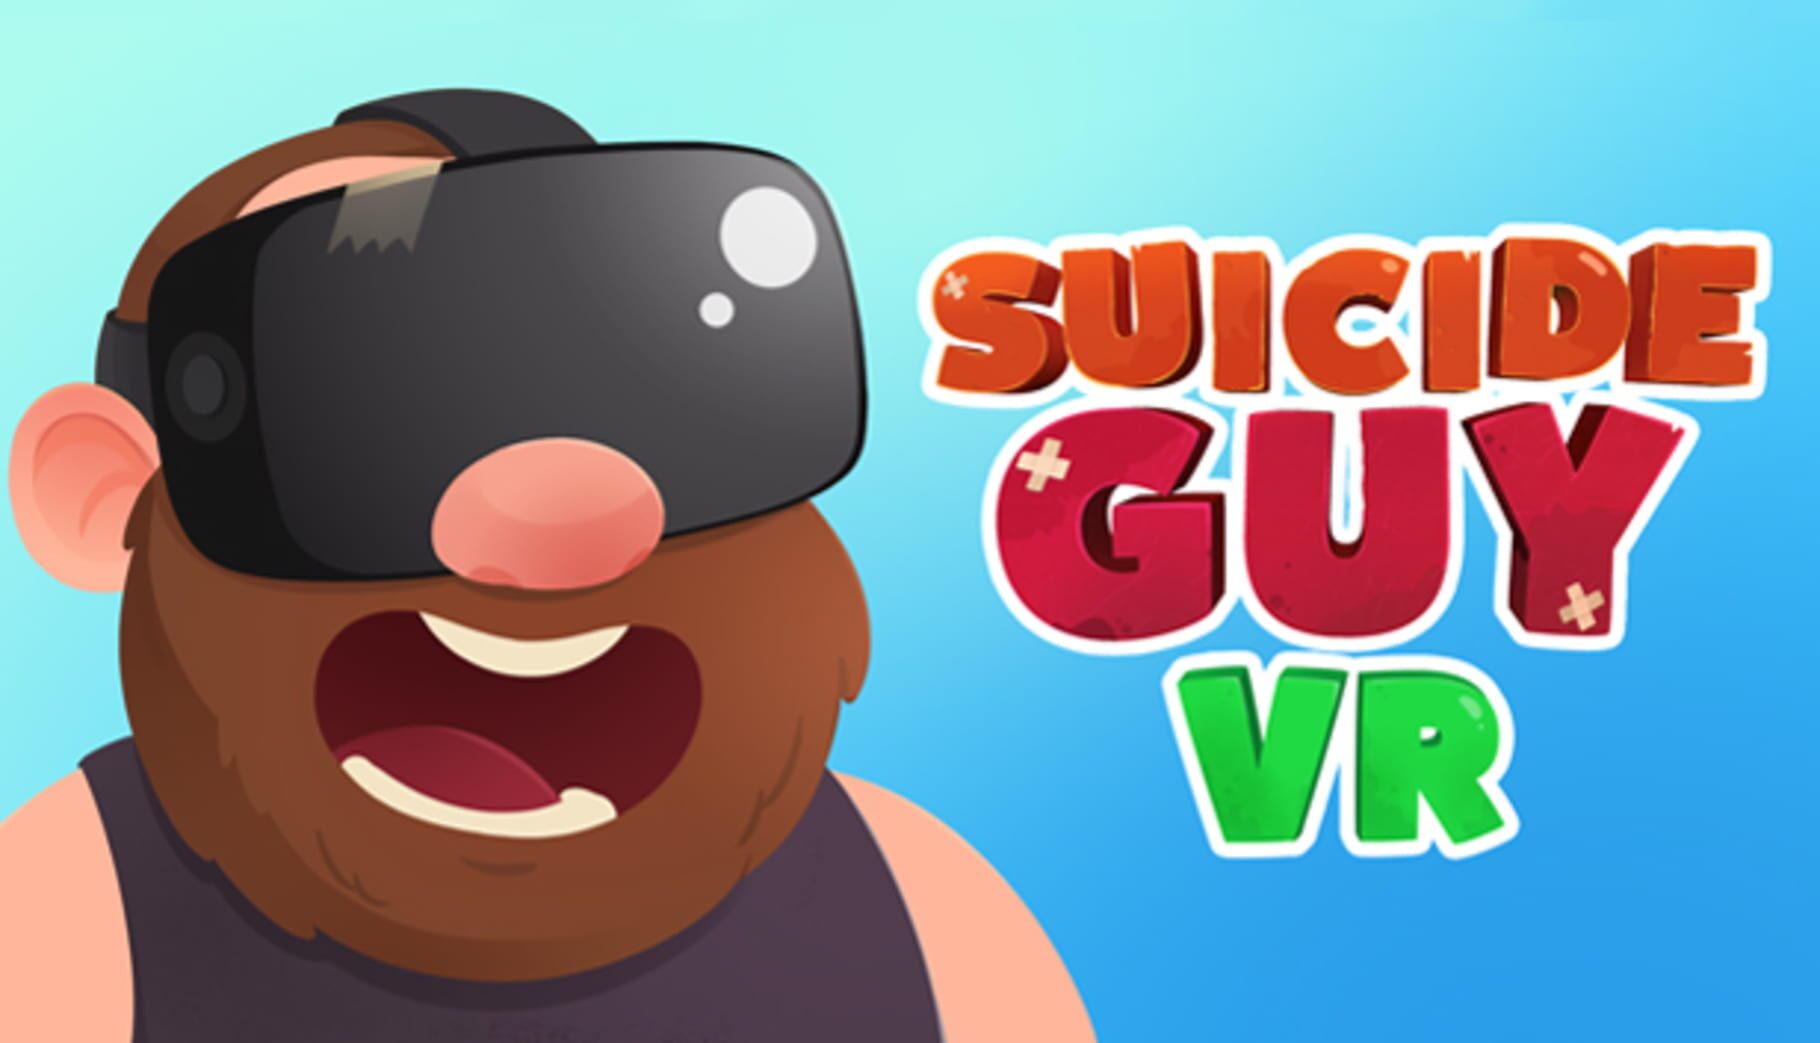 Suicide guy steam фото 95